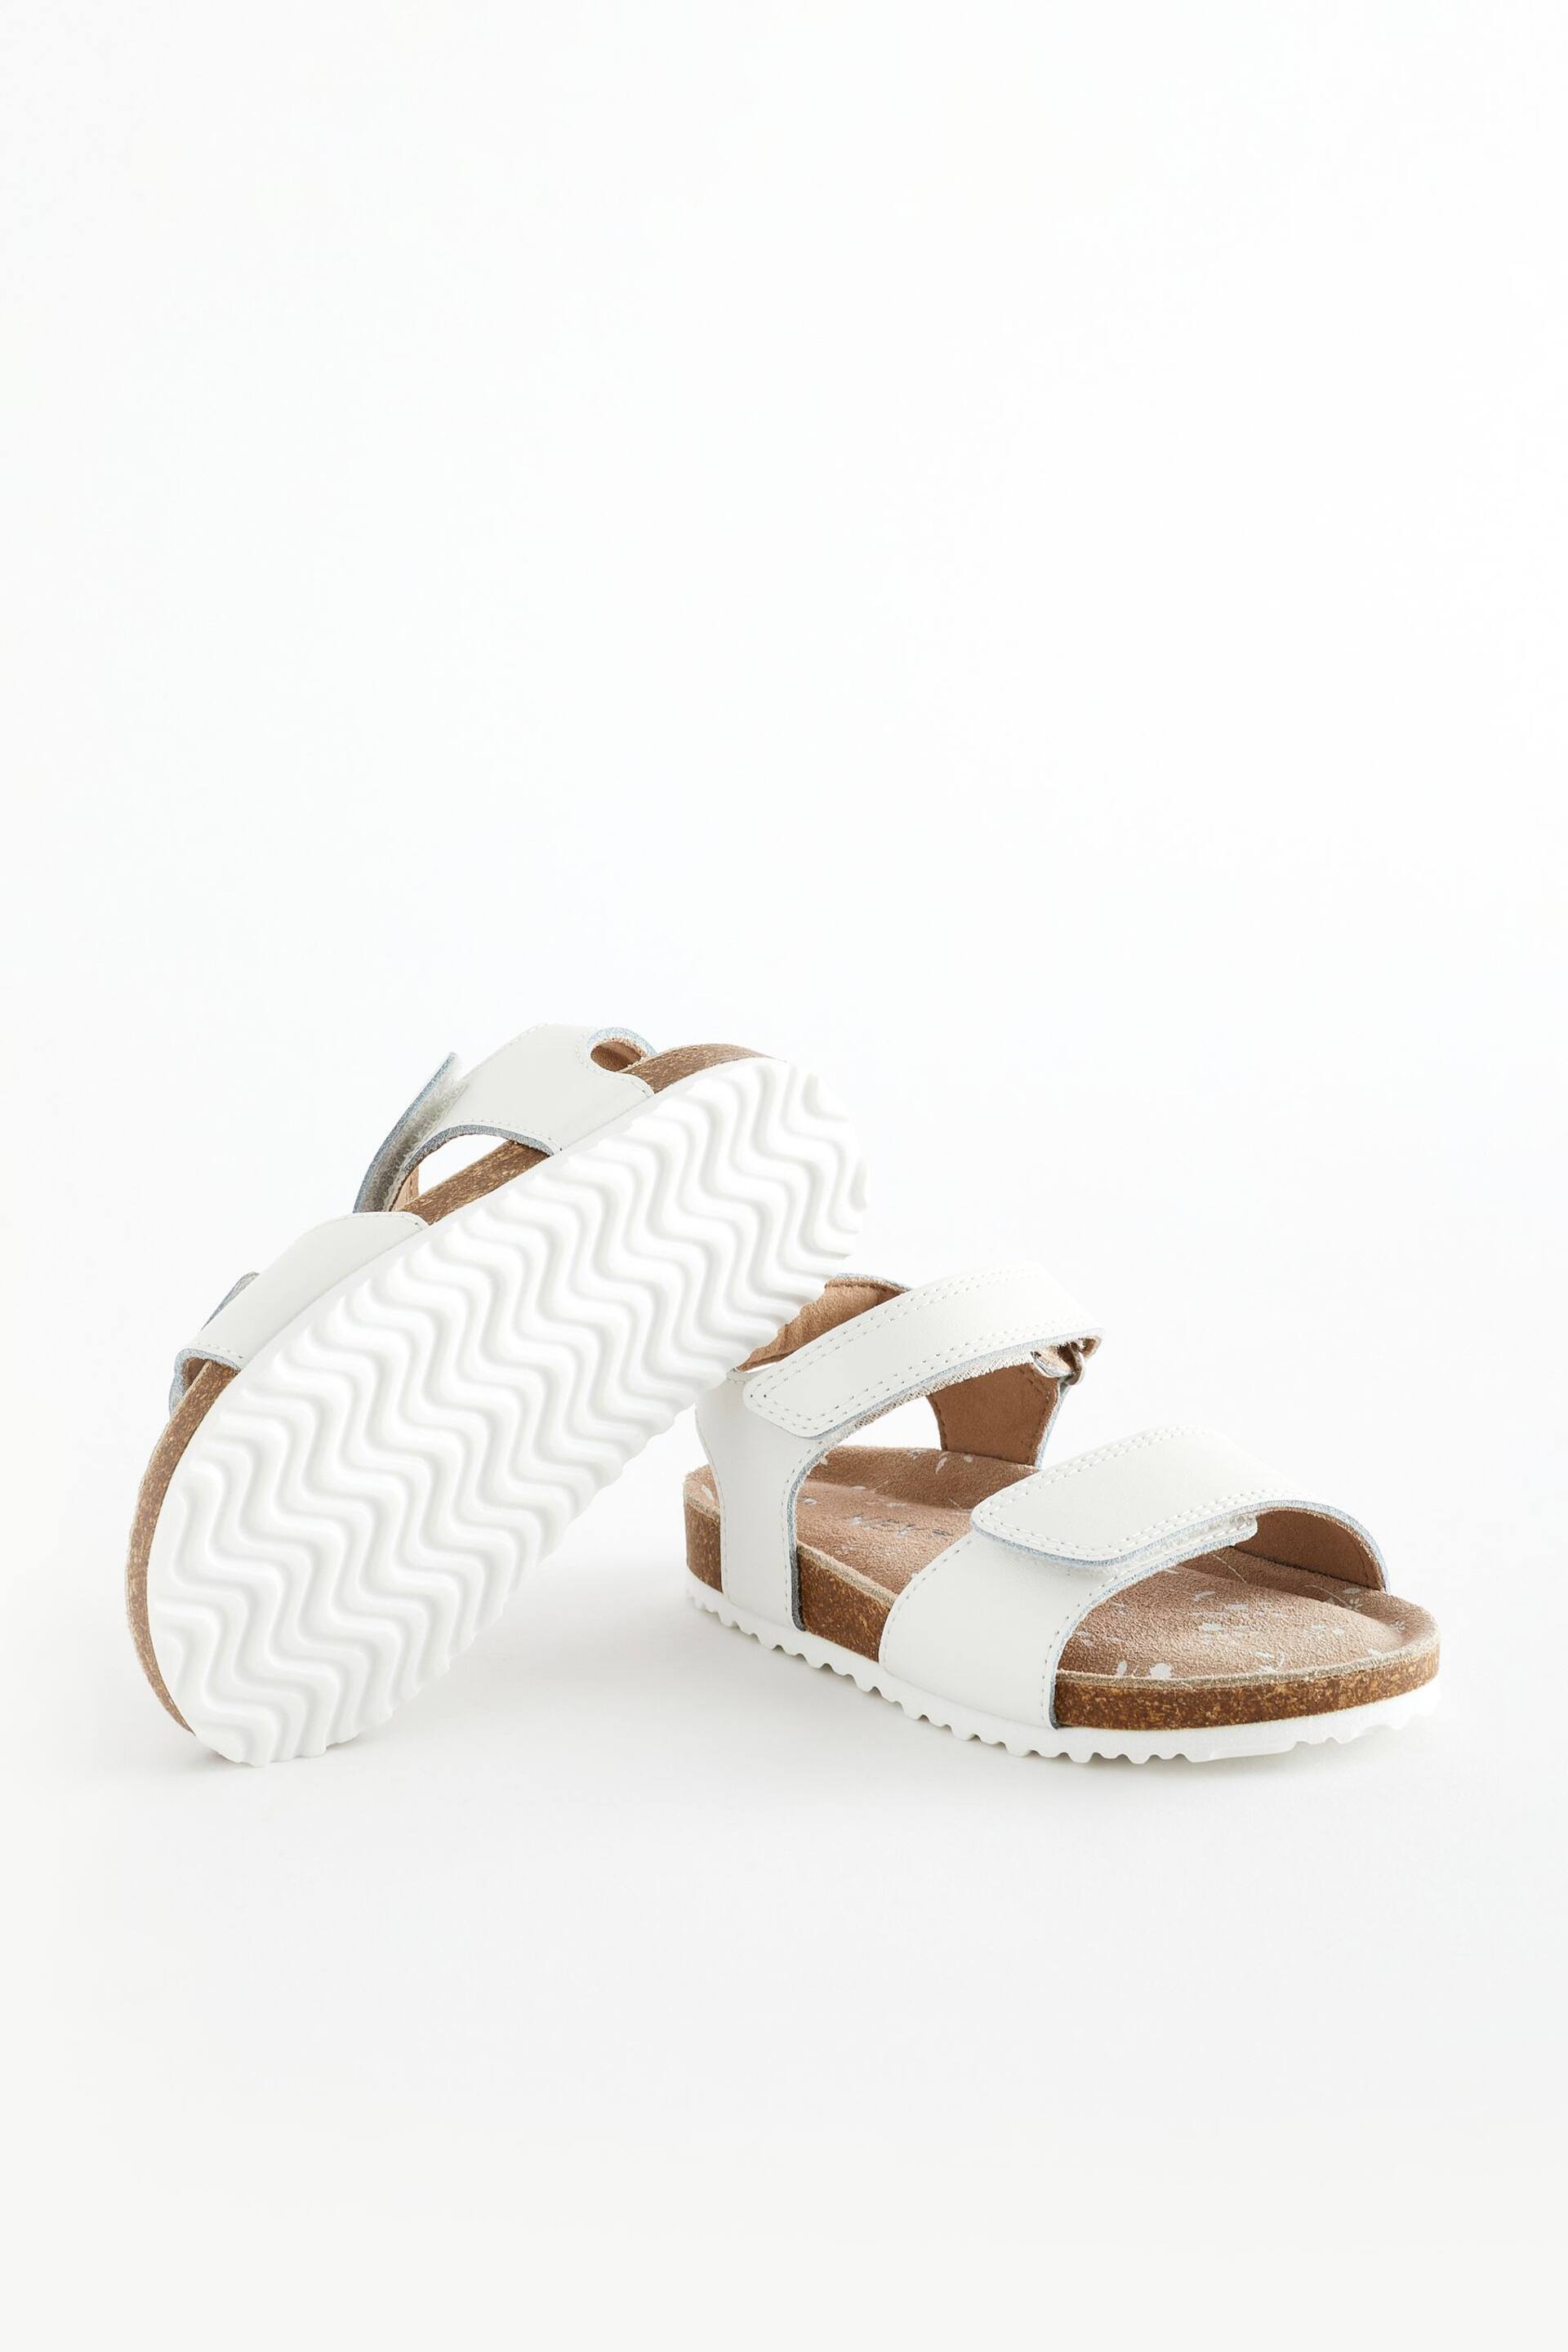 White Wide Fit (G) Leather Corkbed Sandals - Image 4 of 6